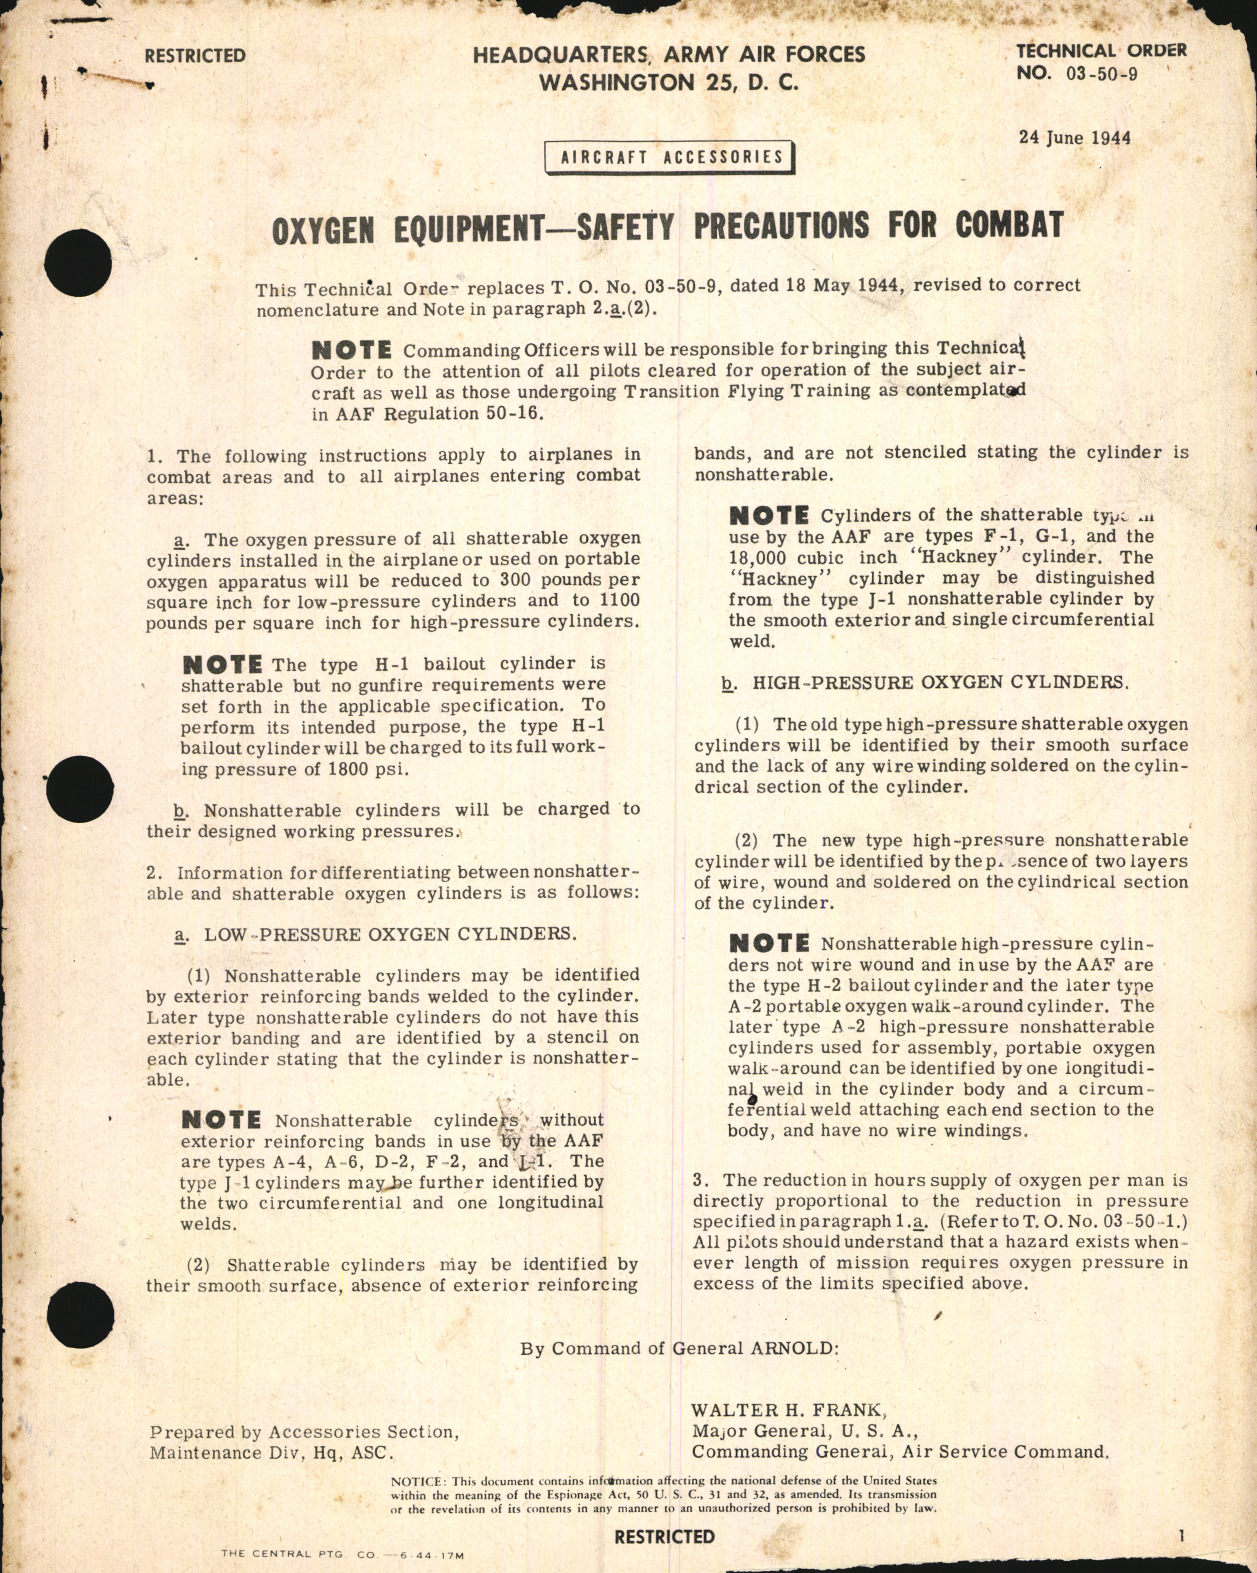 Sample page 1 from AirCorps Library document: Aircraft Accessories; Oxygen Equipment Safety Precautions for Combat